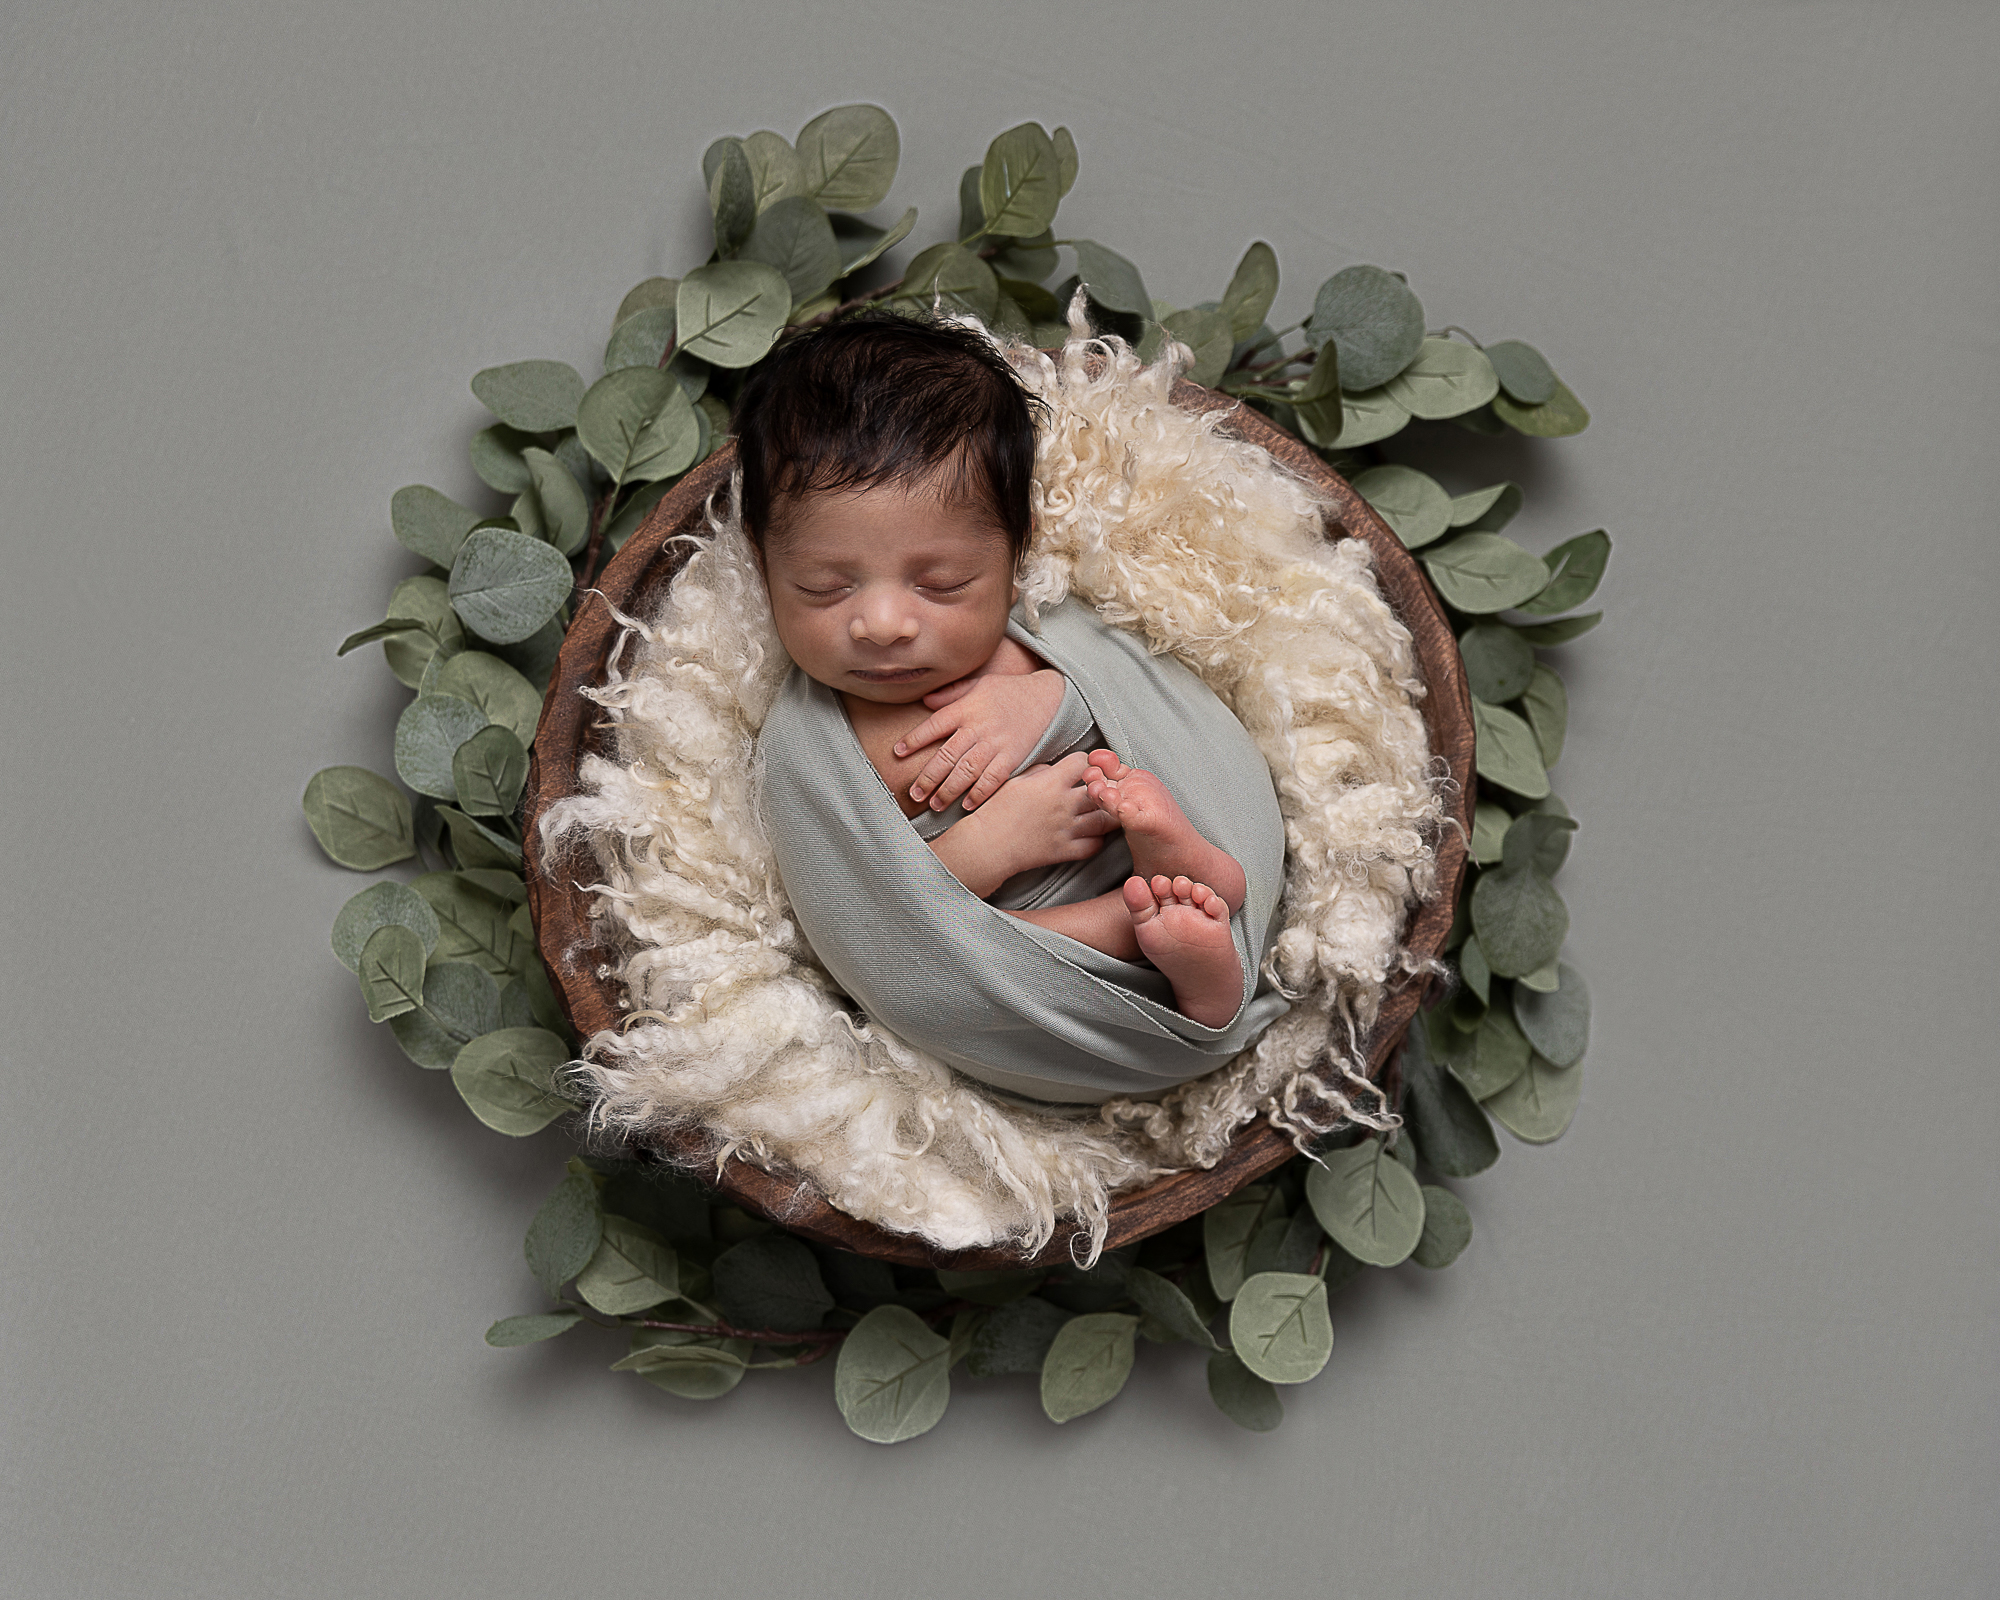 Baby boy on a bed of leaves, taken by a Newborn Photographer in Carshalton